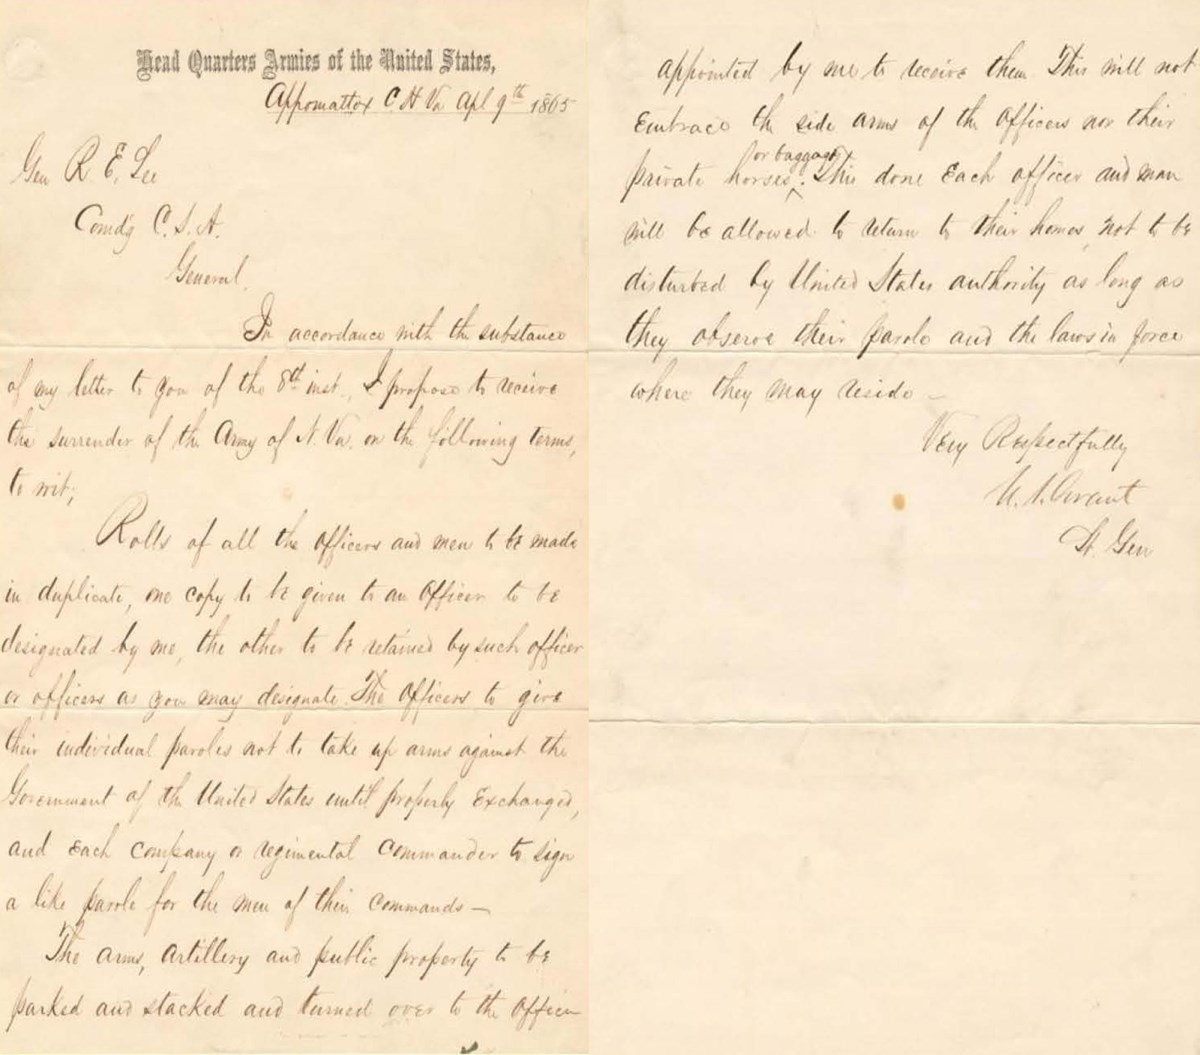 Handwritten letter describing the terms of surrender of the Army of Northern Virginia